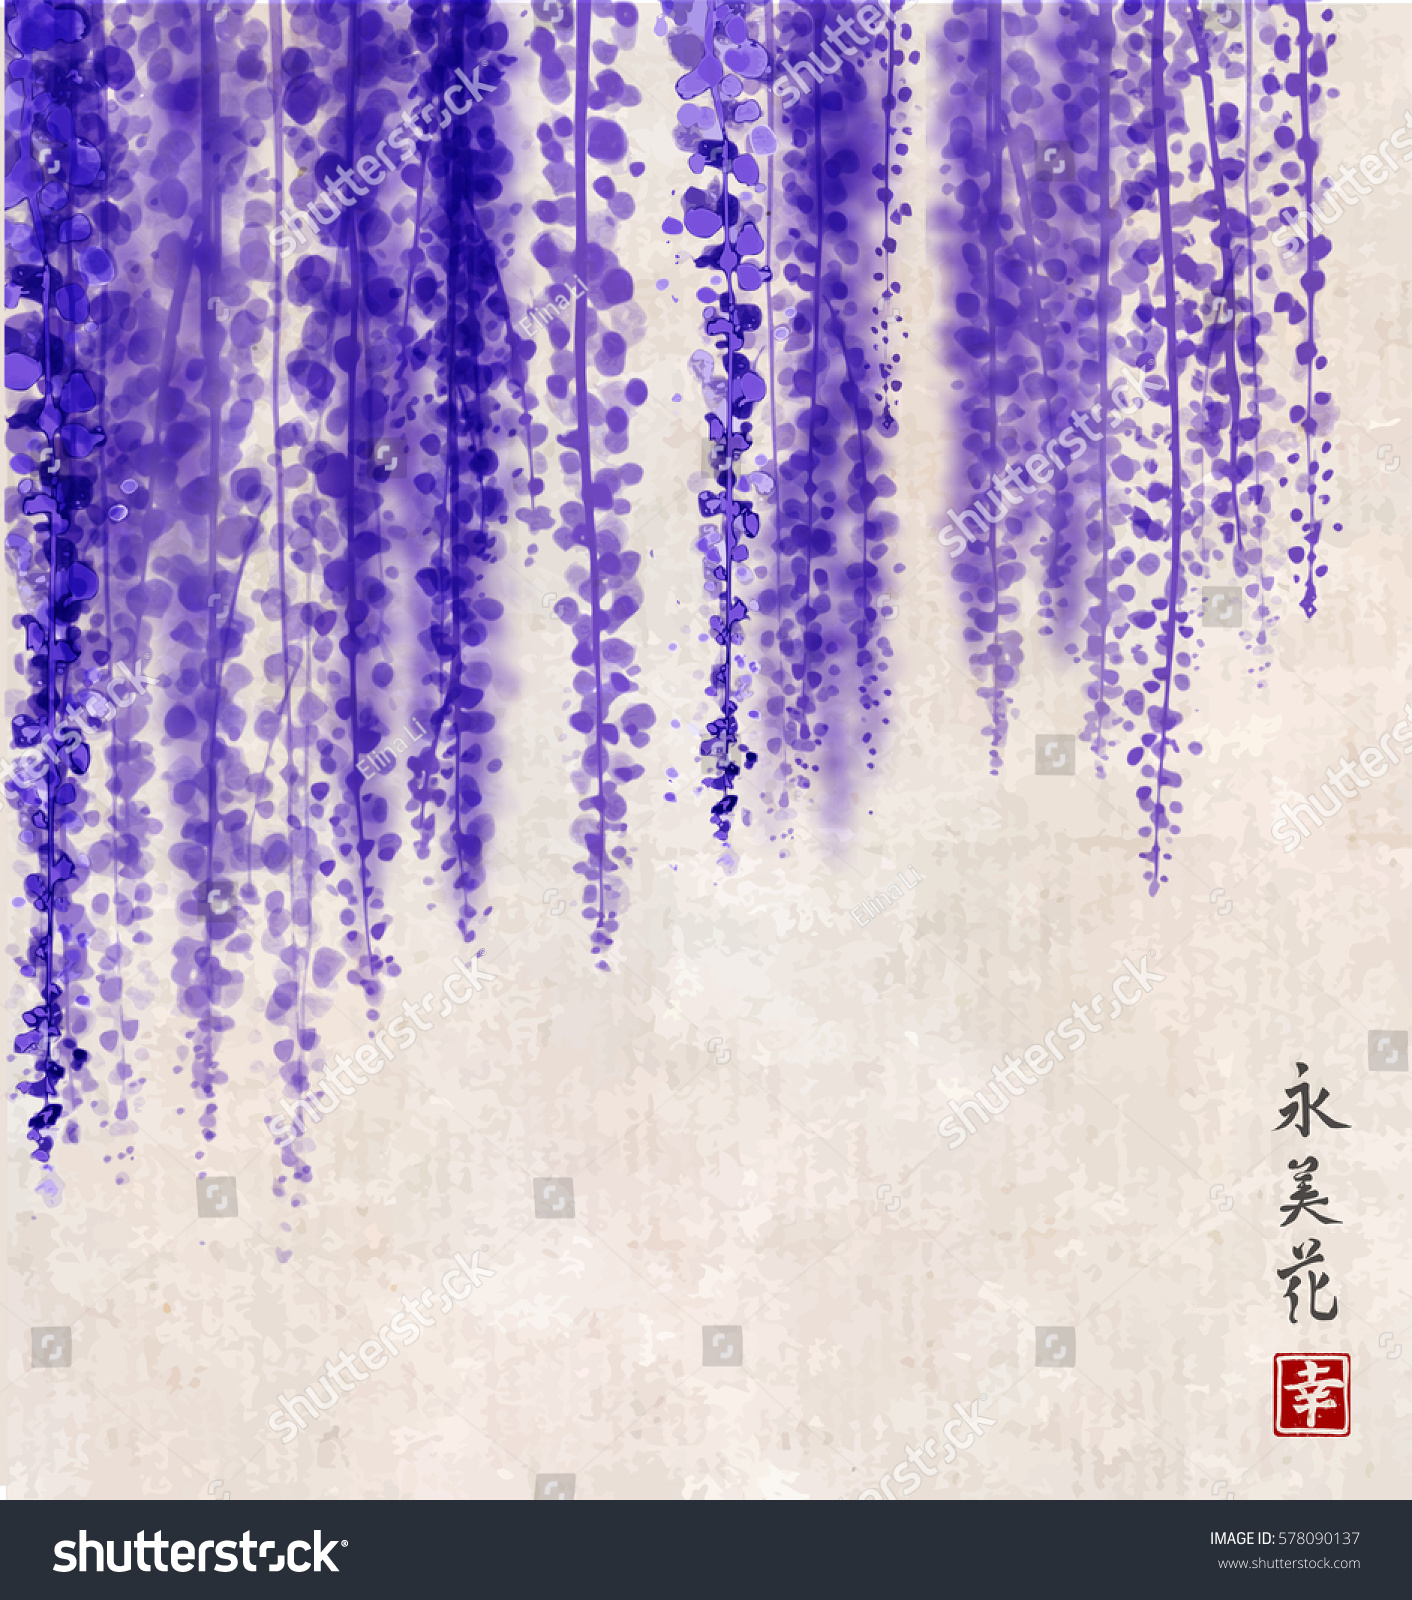 SVG of Wisteria hand drawn with ink on vintage background. Contains hieroglyphs - happiness, eternity, beauty, flower. Traditional oriental ink painting sumi-e, u-sin, go-hua. Bunches of flowers. svg